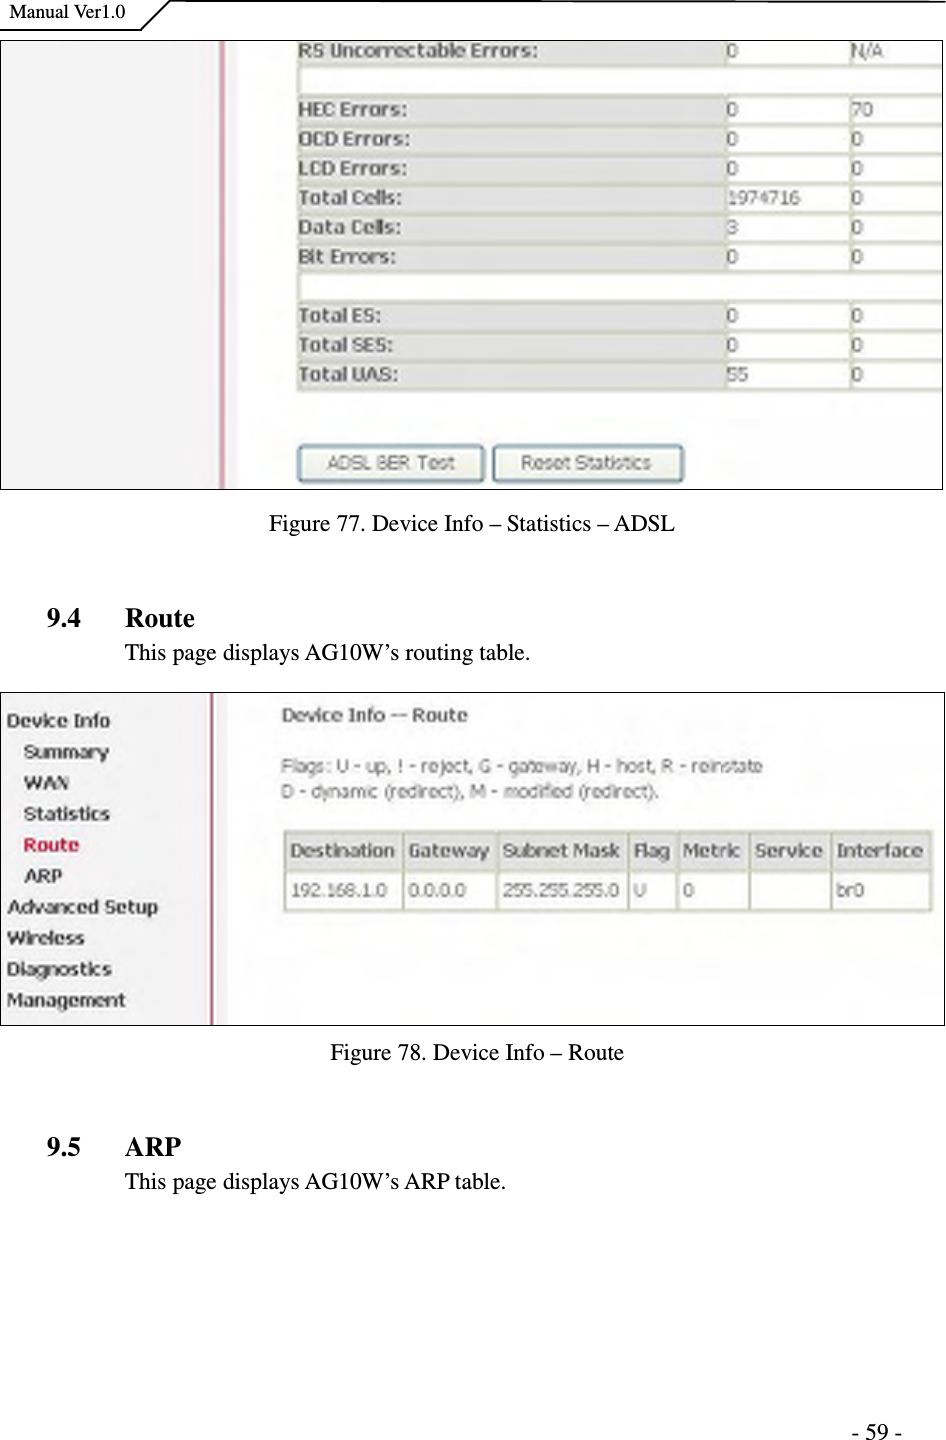    Manual Ver1.0                                                                      - 59 -  Figure 77. Device Info – Statistics – ADSL    9.4 Route This page displays AG10W’s routing table.   Figure 78. Device Info – Route  9.5 ARP This page displays AG10W’s ARP table. 